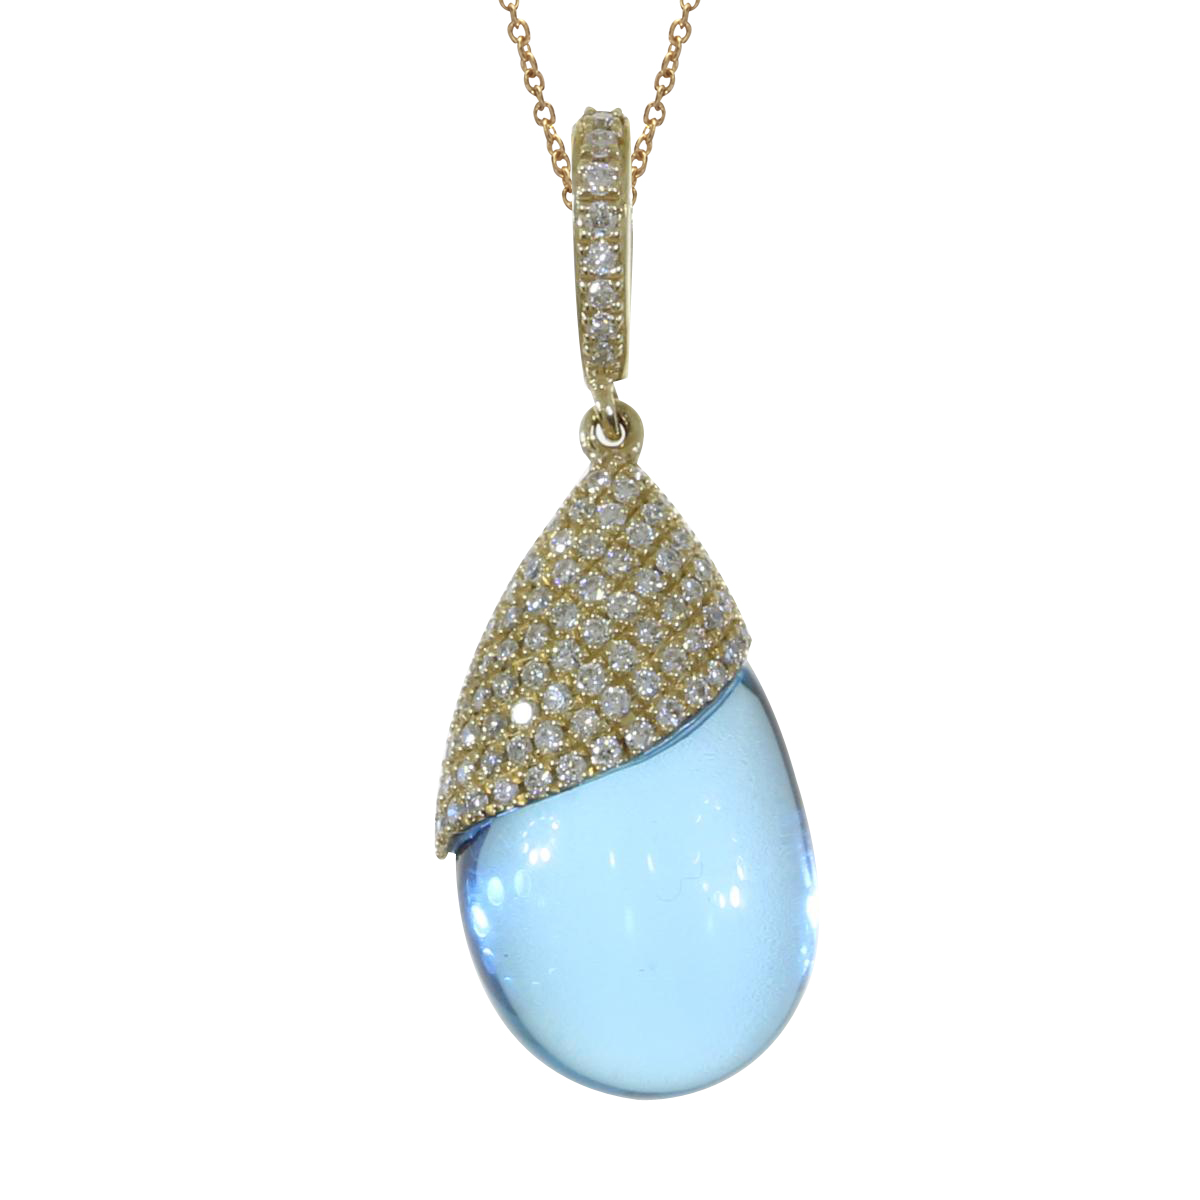 A luminous 15.8x10.3 mm cabochon blue topaz pendant topped off with .27 total carat diamonds set in 14k gold.